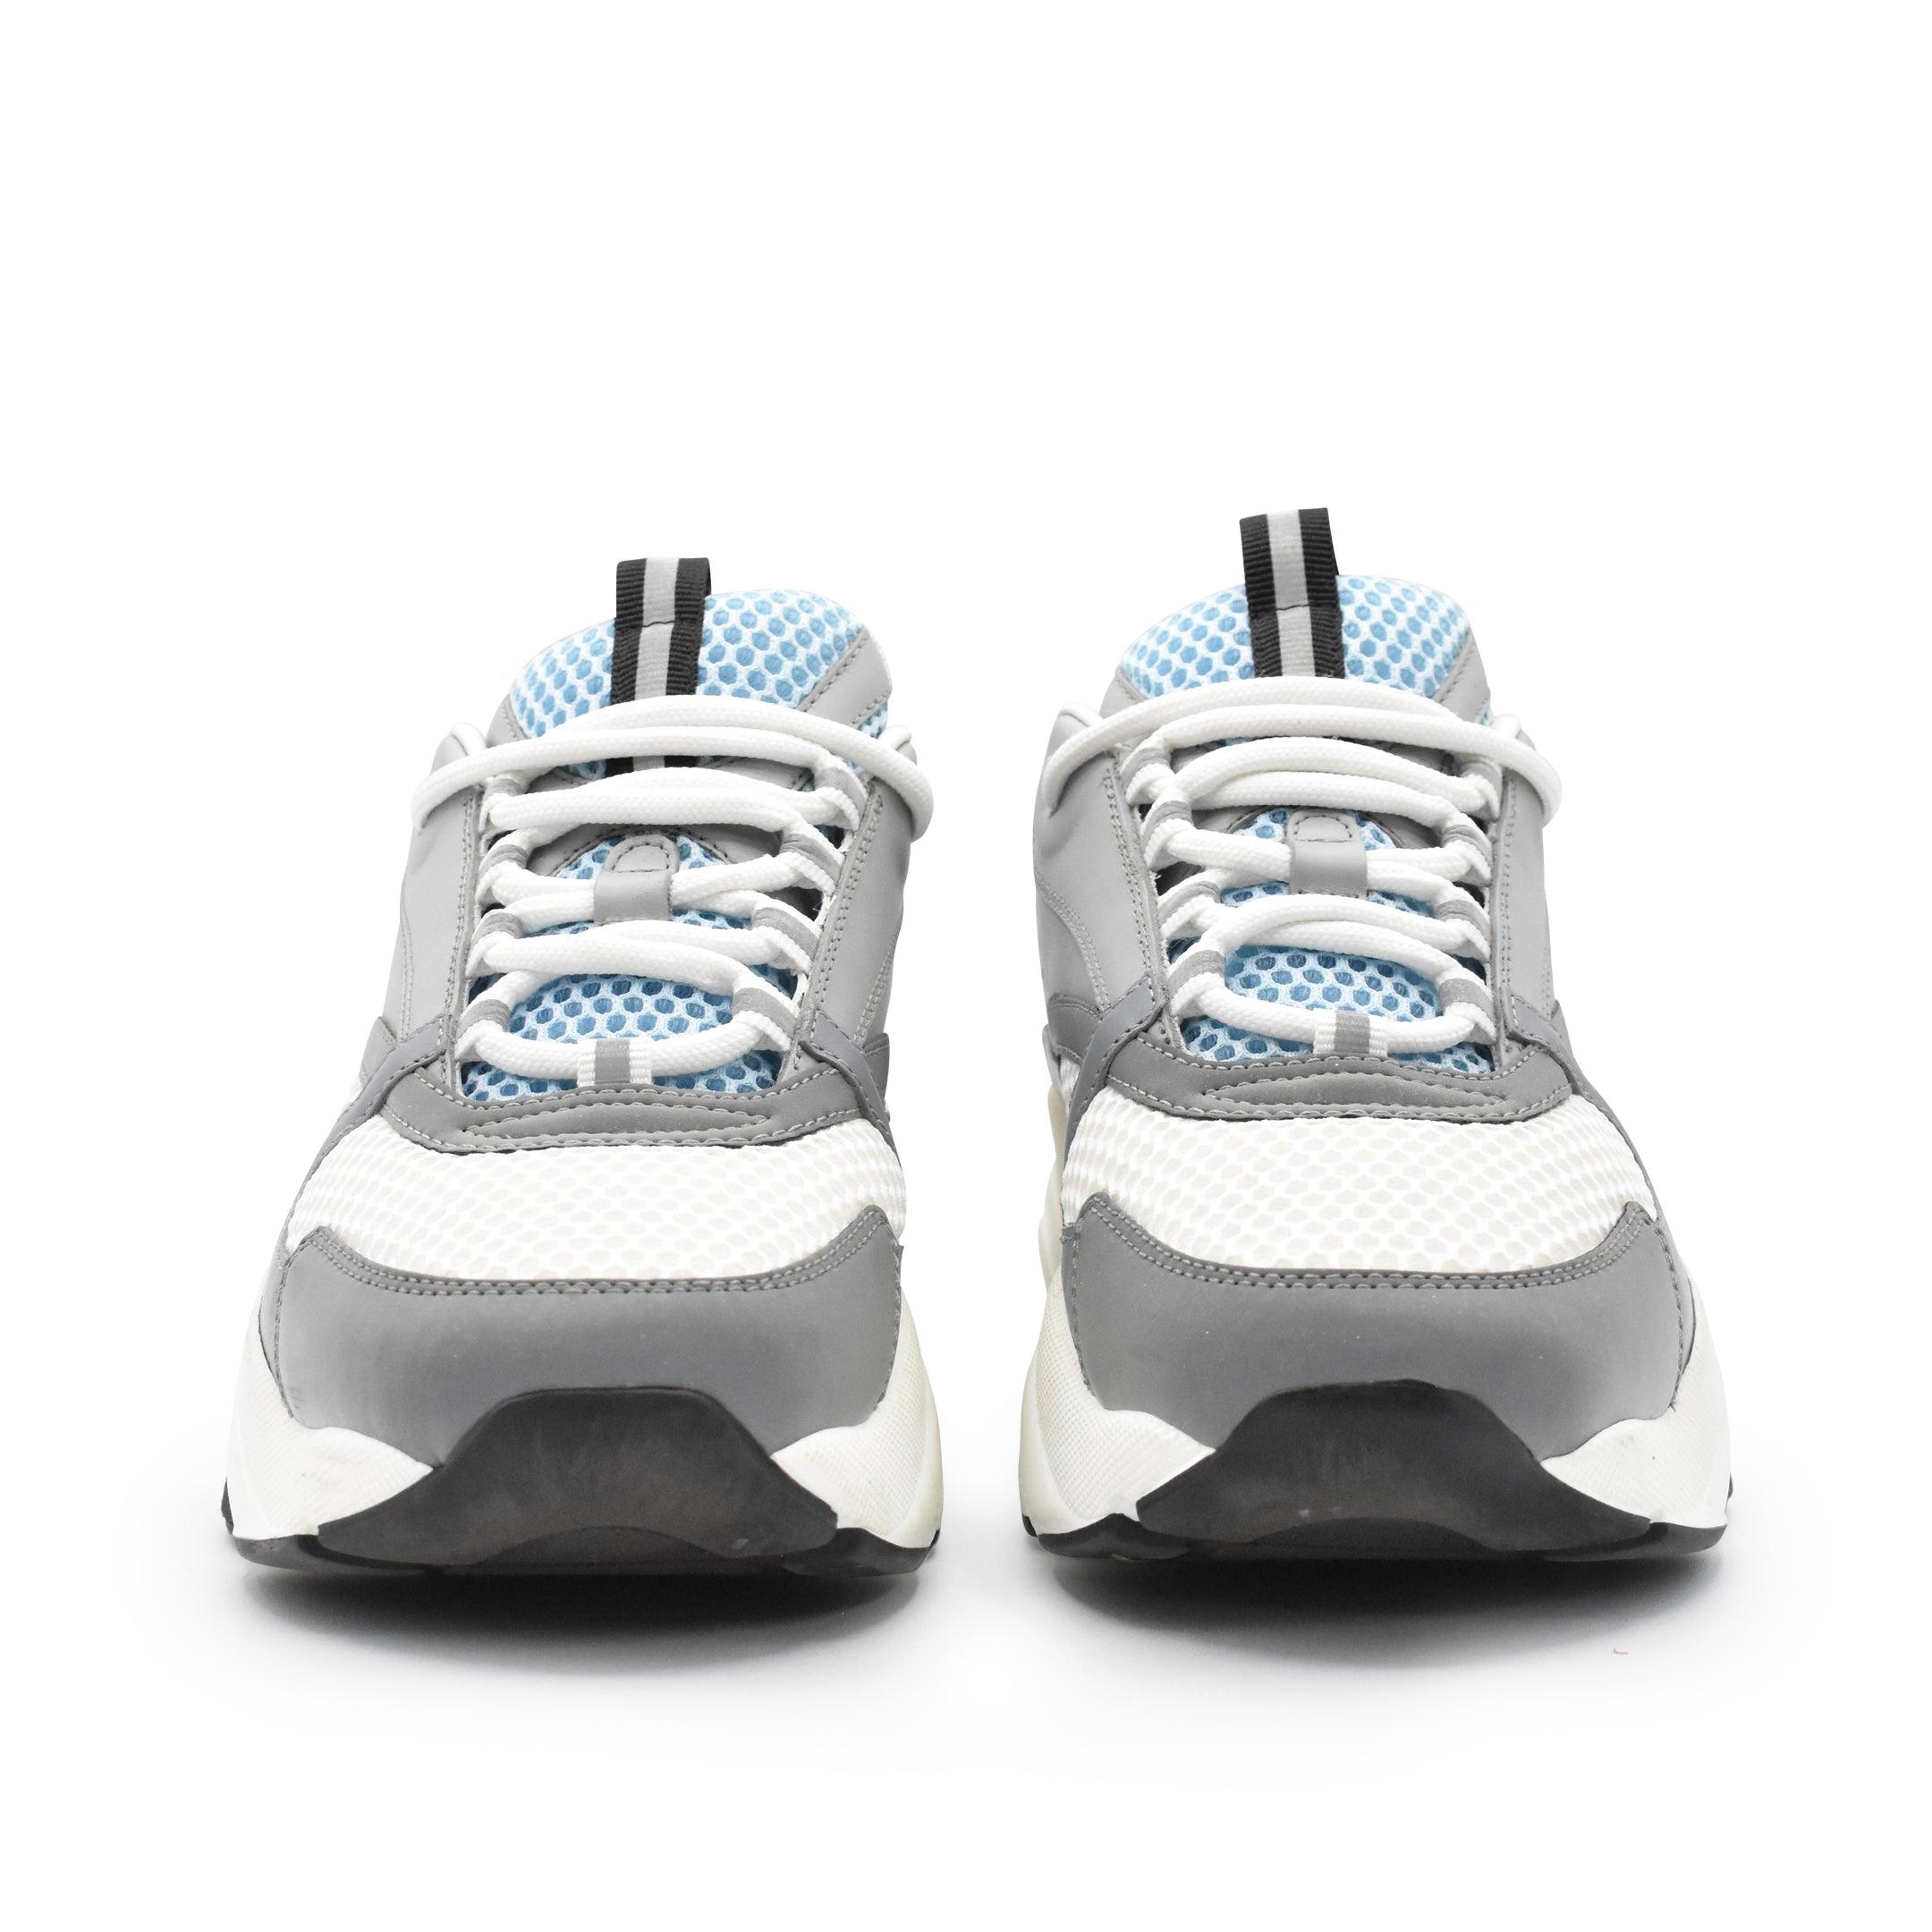 Christian Dior 'B22' Sneakers - Women's 39 - Fashionably Yours